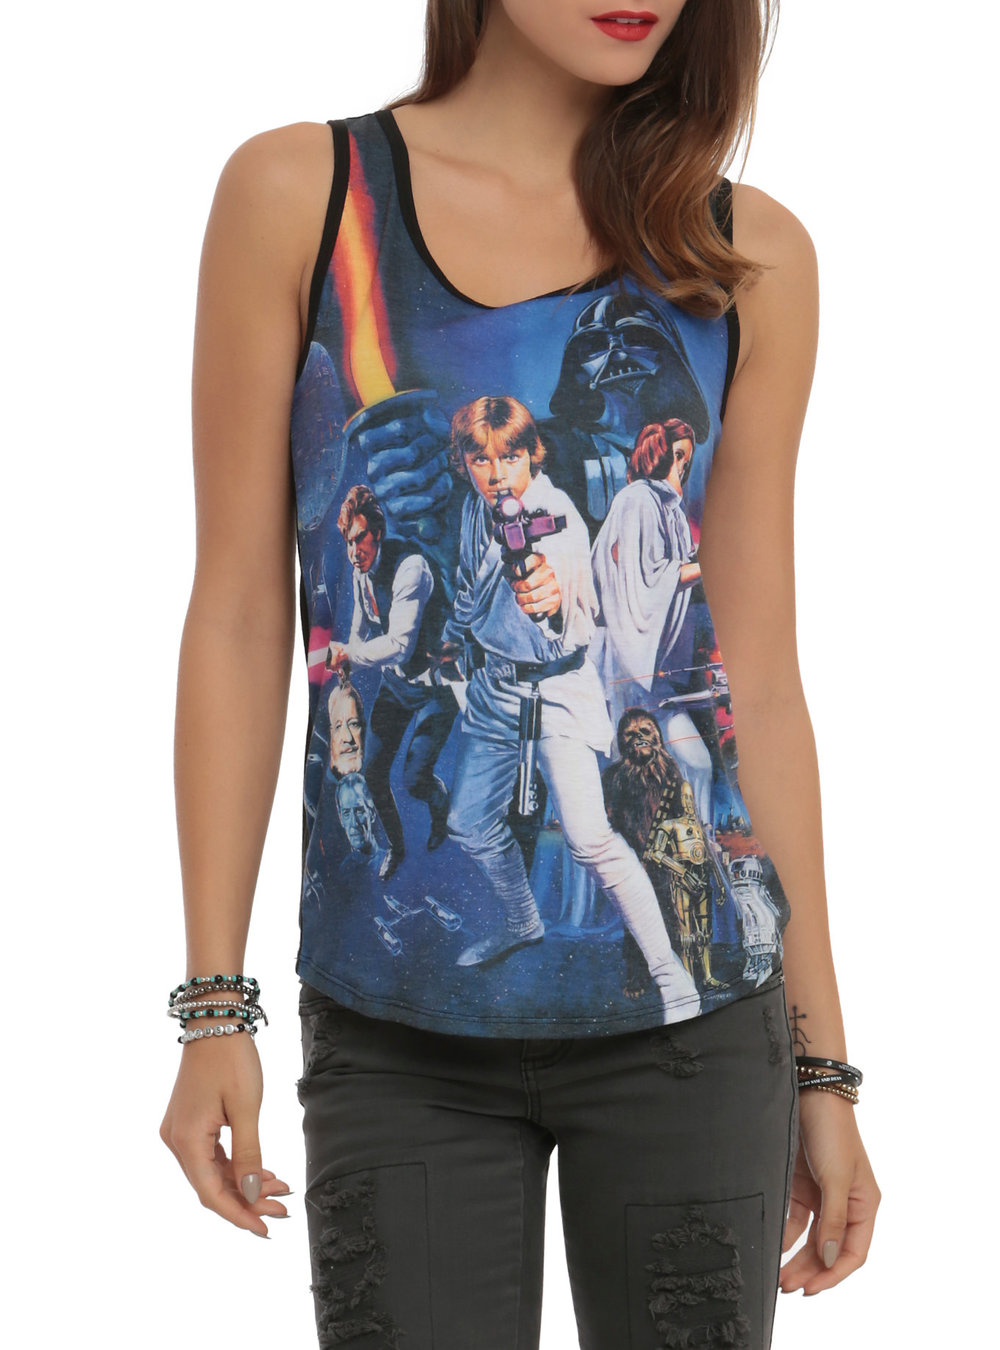  Star Wars Her Universe New Hope Muscle Shirt. Hot Topic. $24-28. Additional 30% off now.  